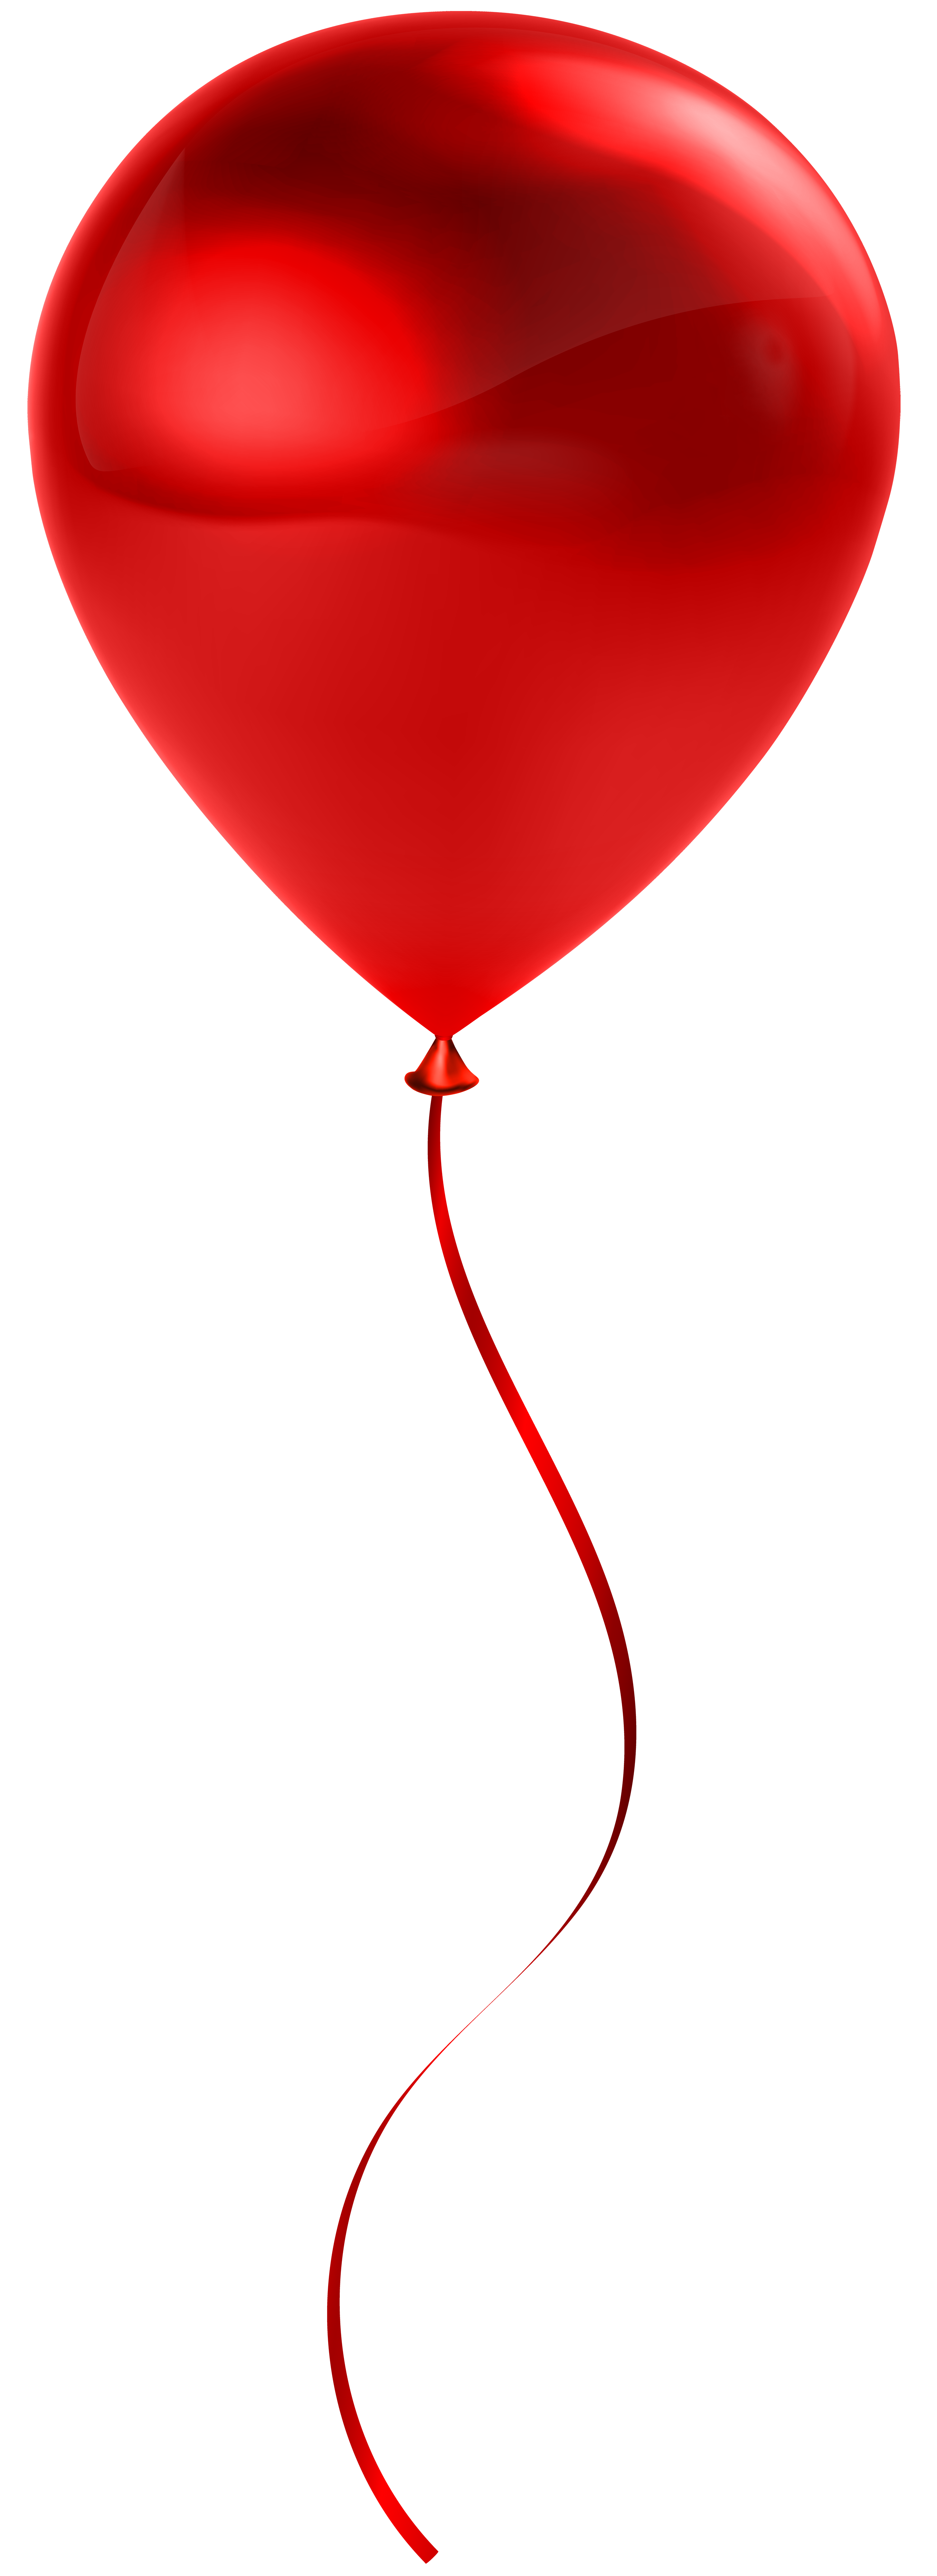 Free Transparent Red Balloon, Download Free Transparent Red Balloon png ...